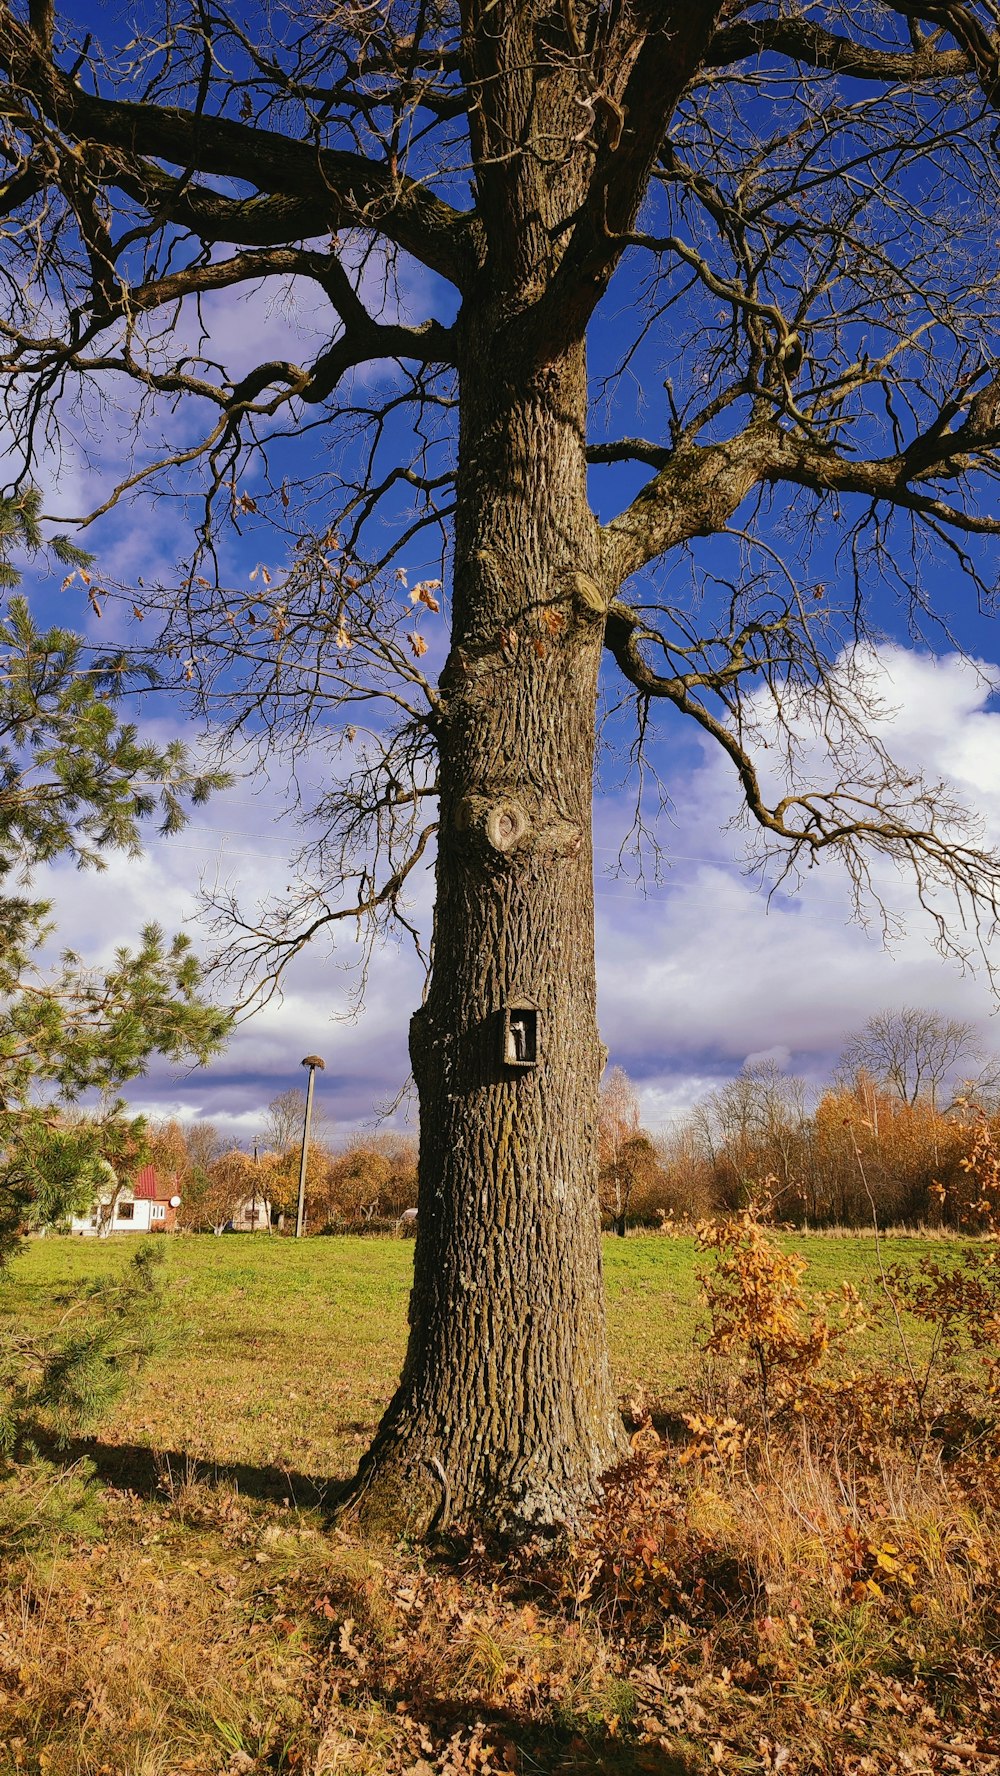 a tree with a hole in the bark